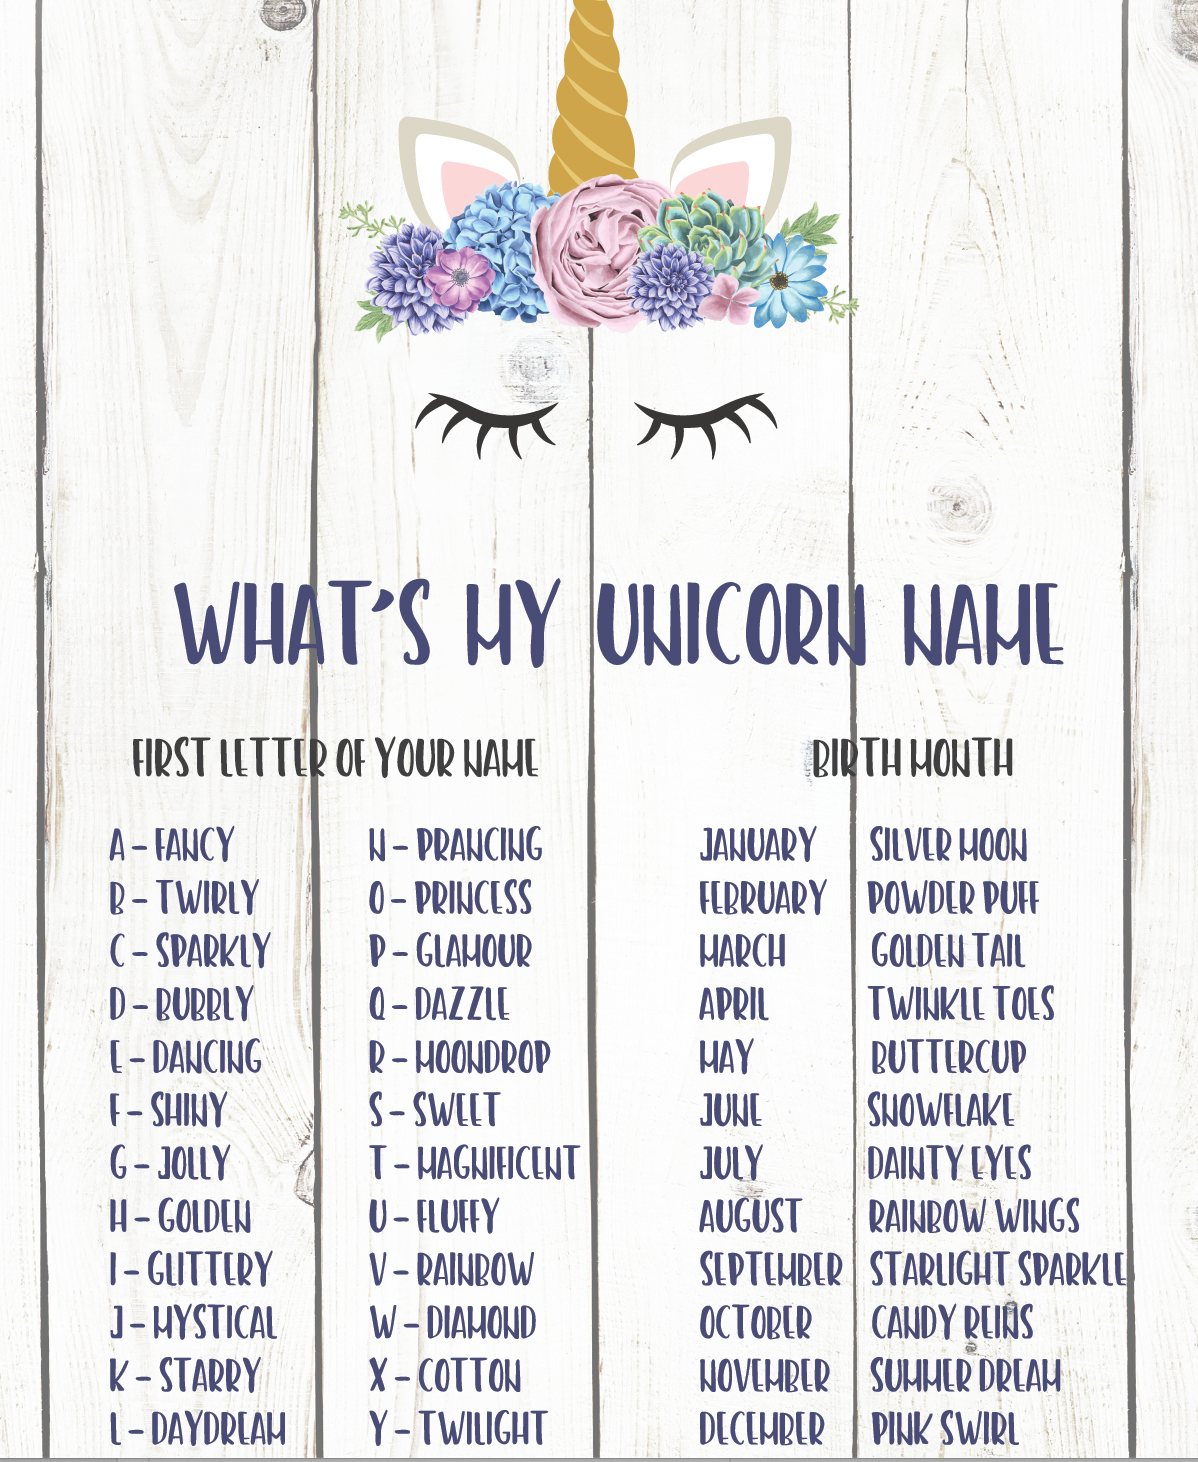 What's your unicorn name unicorn party games